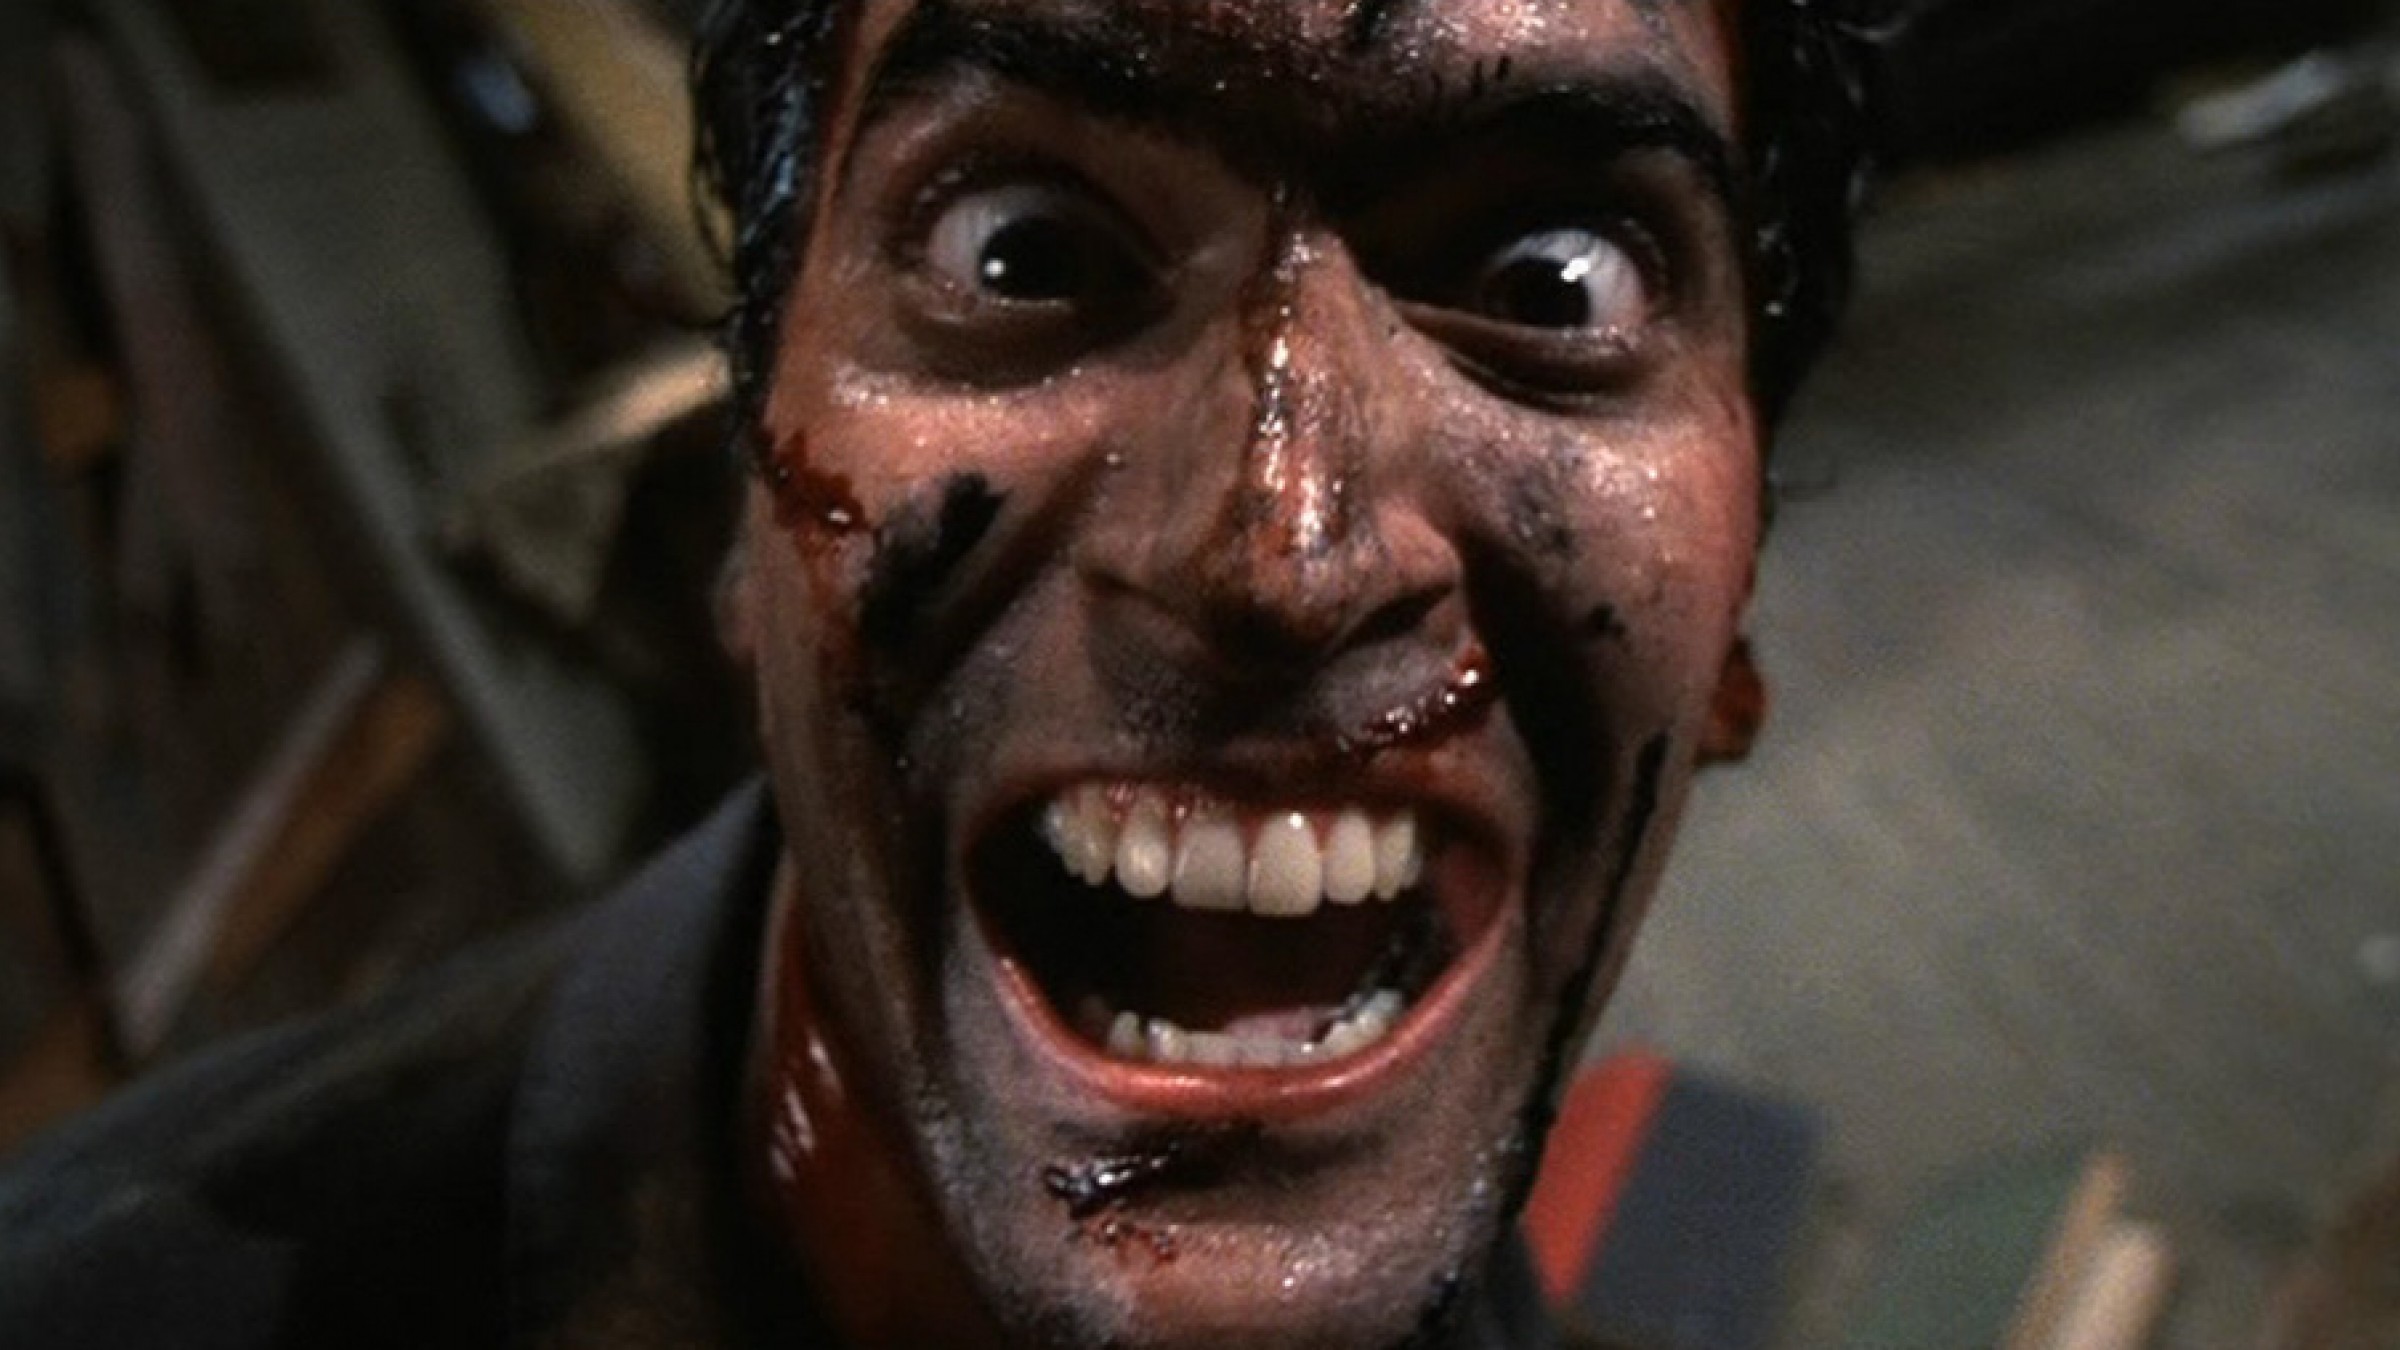 The Evil Dead 1 + 2